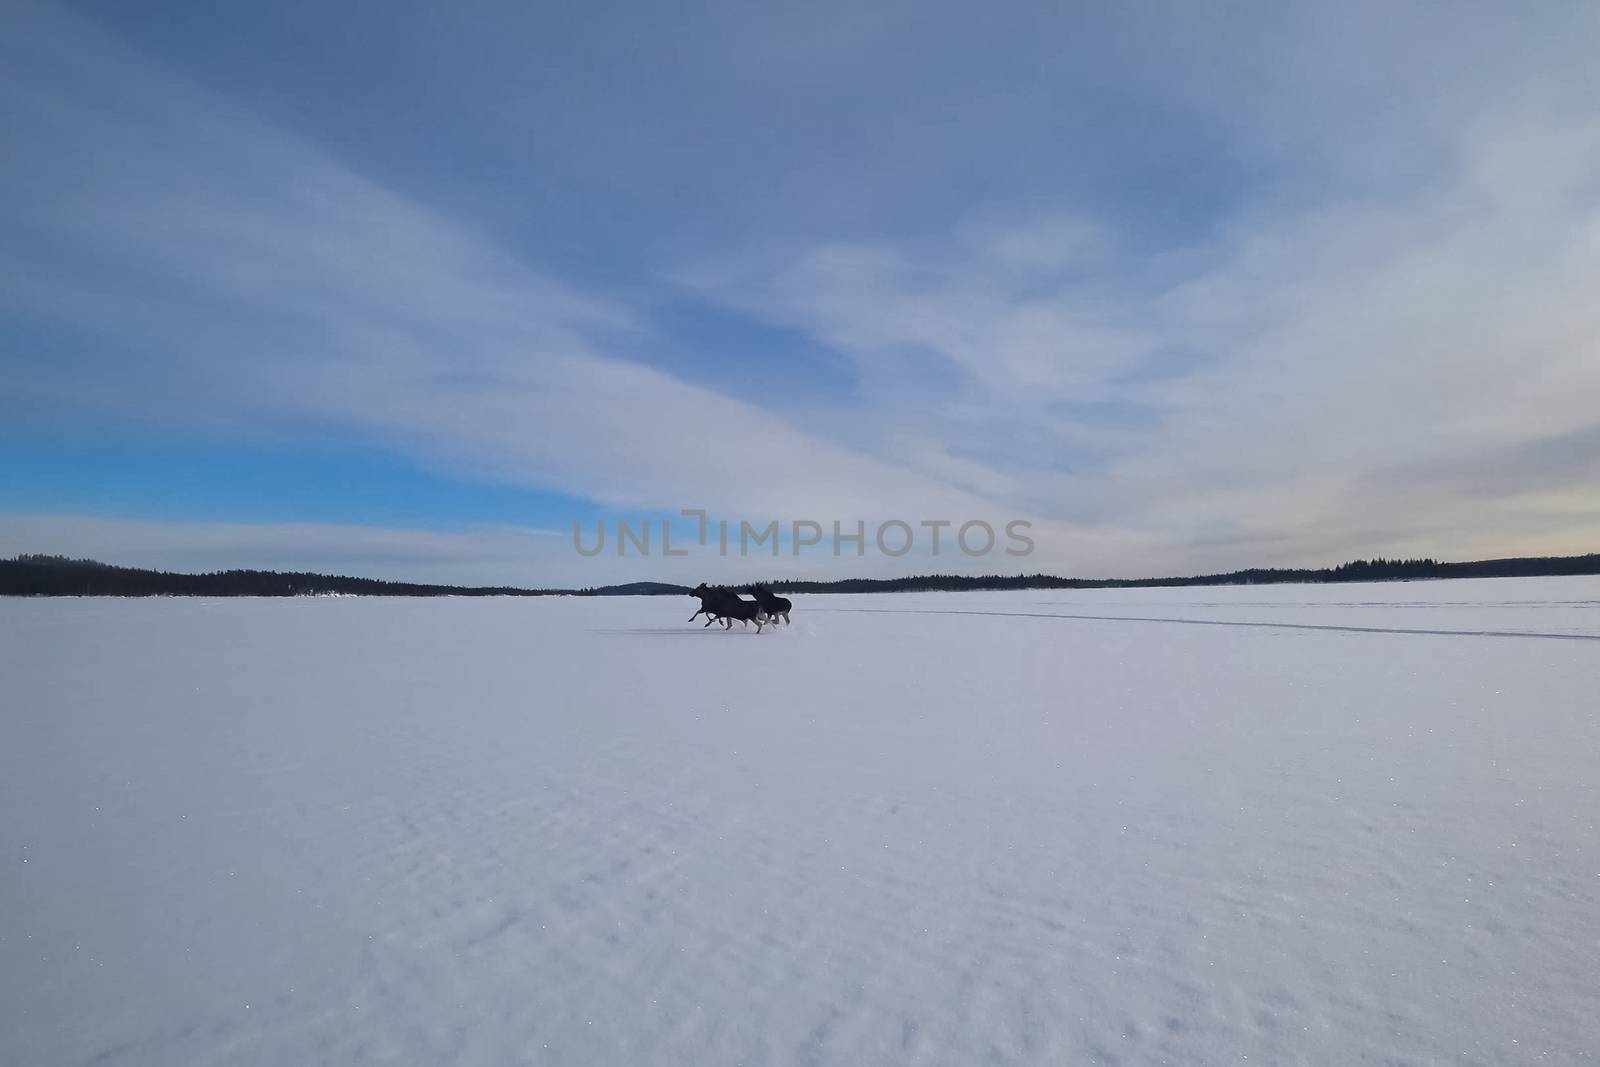 Moose run on an icy lake. Winter and ice on the lake, moose running through the snow.